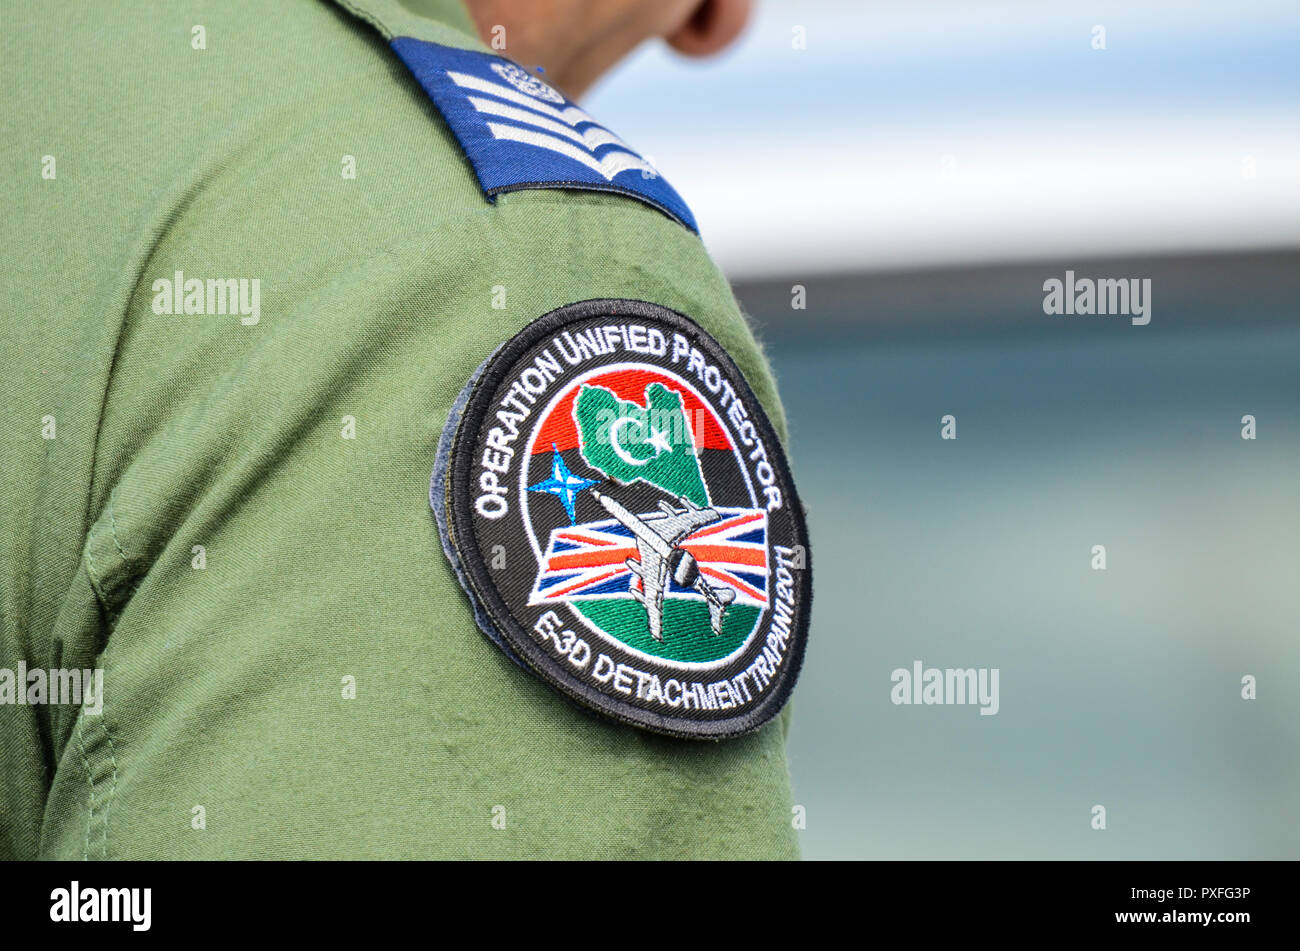 Badge worn by RAF Royal Air Force crew member depicting Operation Unified Protector, E-3D detachment Trapani 2011. Libyan civil war no fly zone Stock Photo